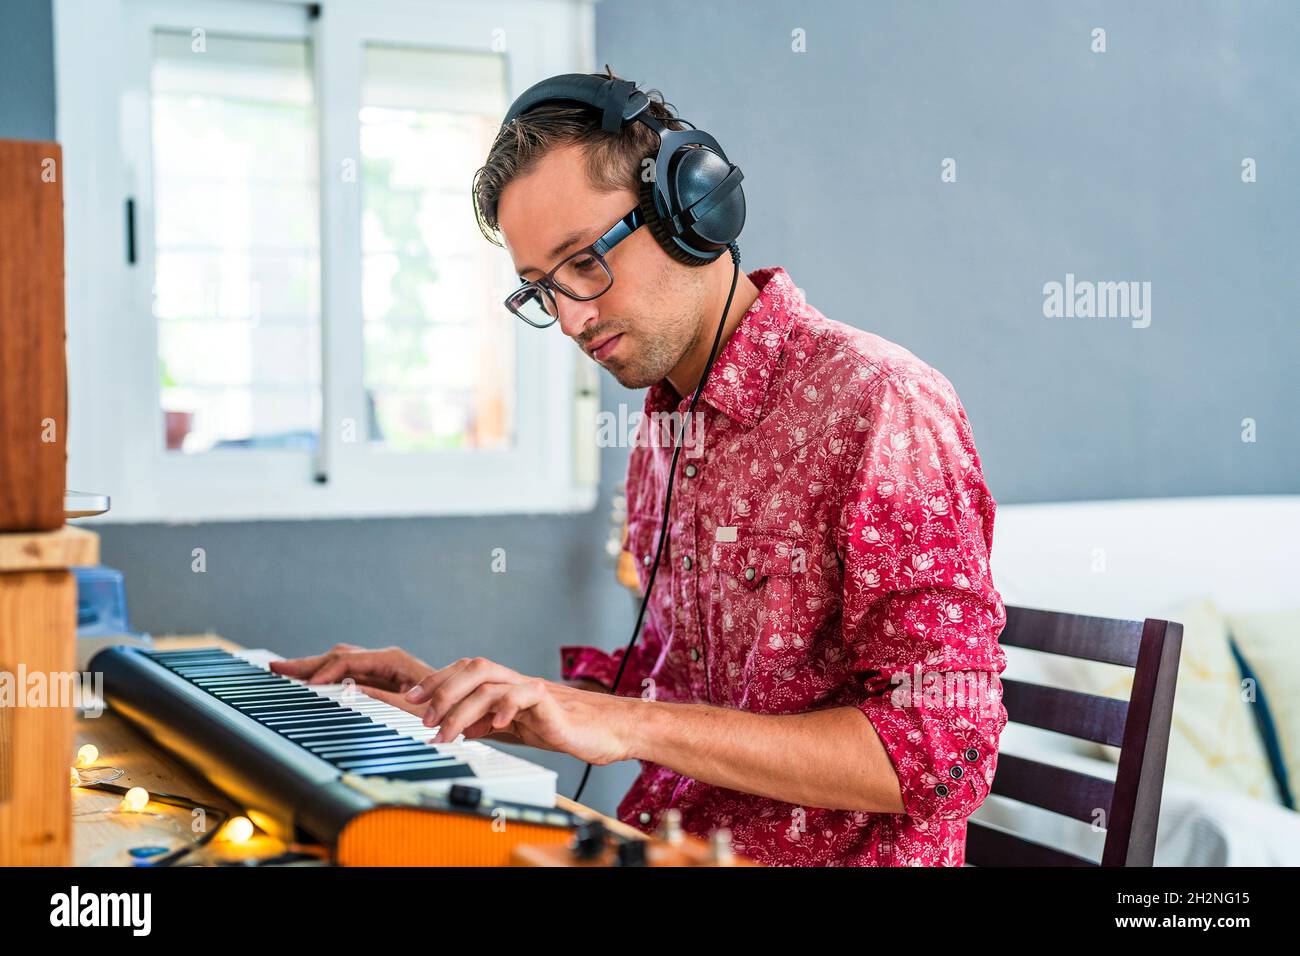 Male musician wearing headphones while playing piano at home Stock Photo